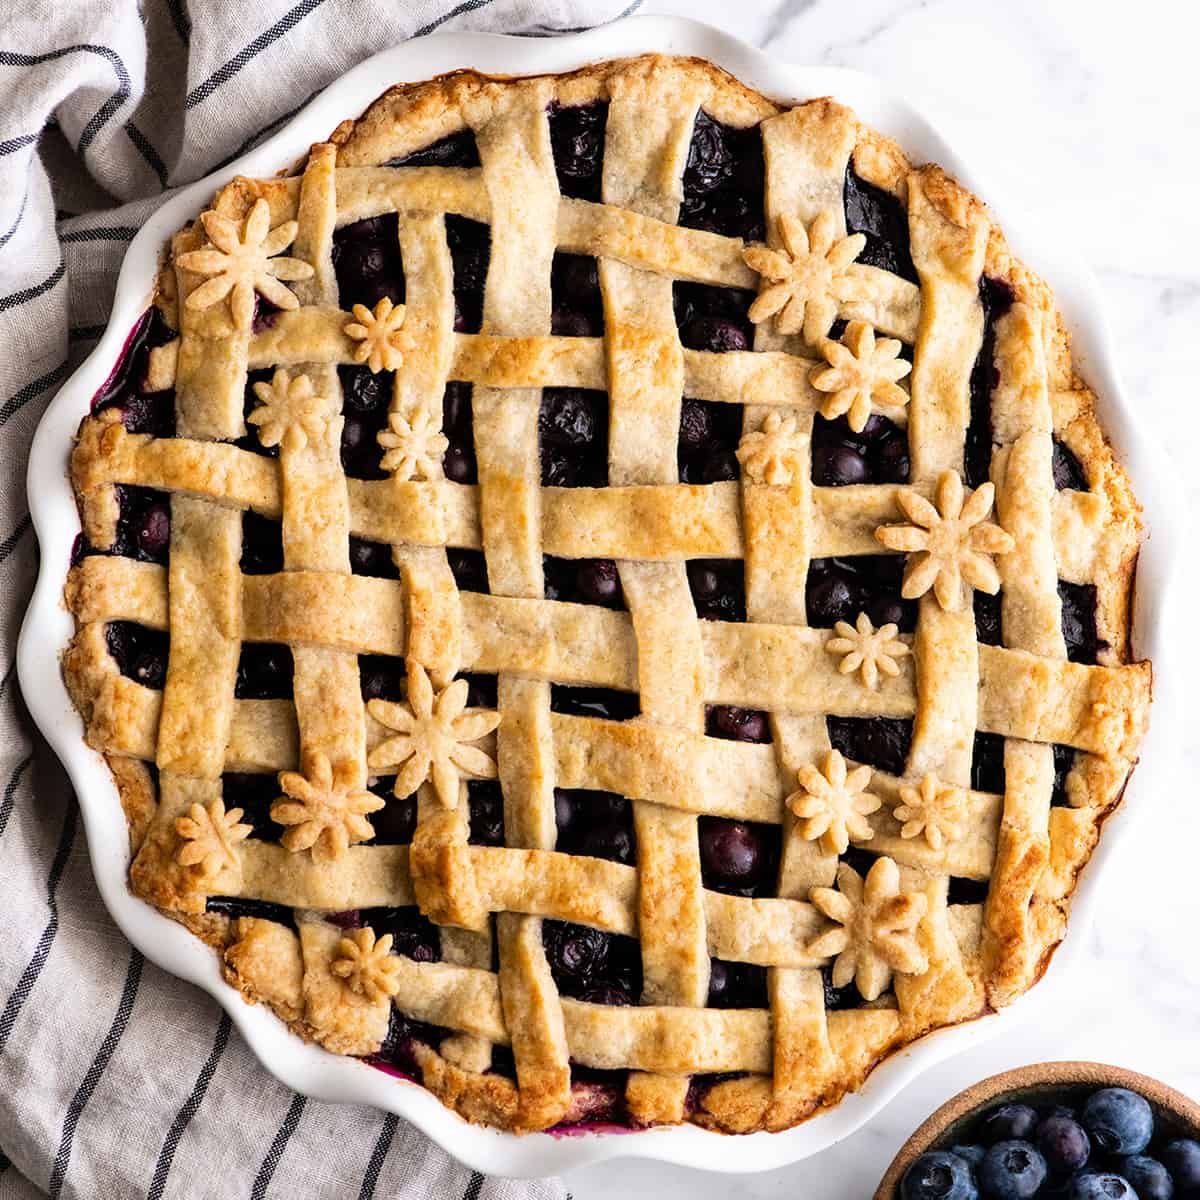 overhead view of a baked blueberry pie with a lattice crust